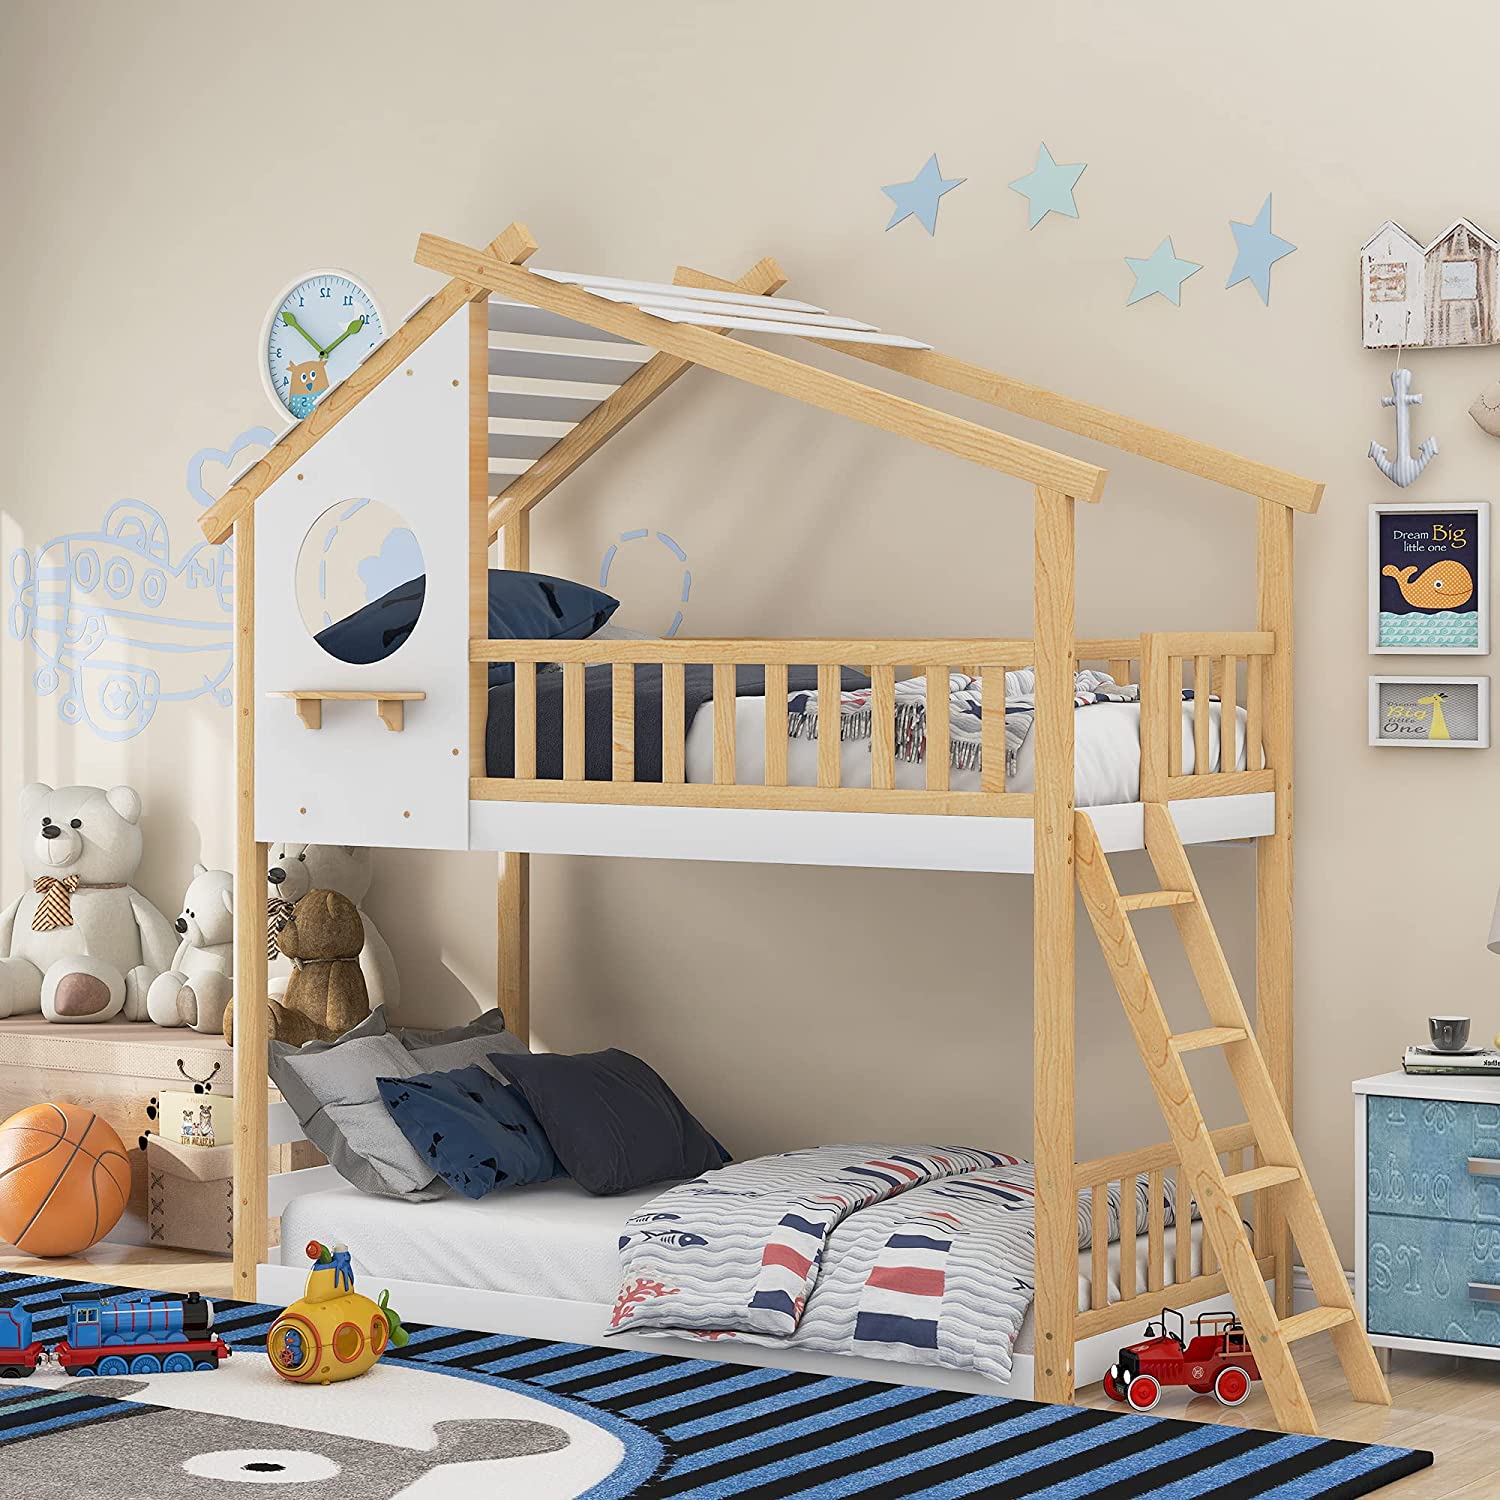 Bunk Bed with Play Area